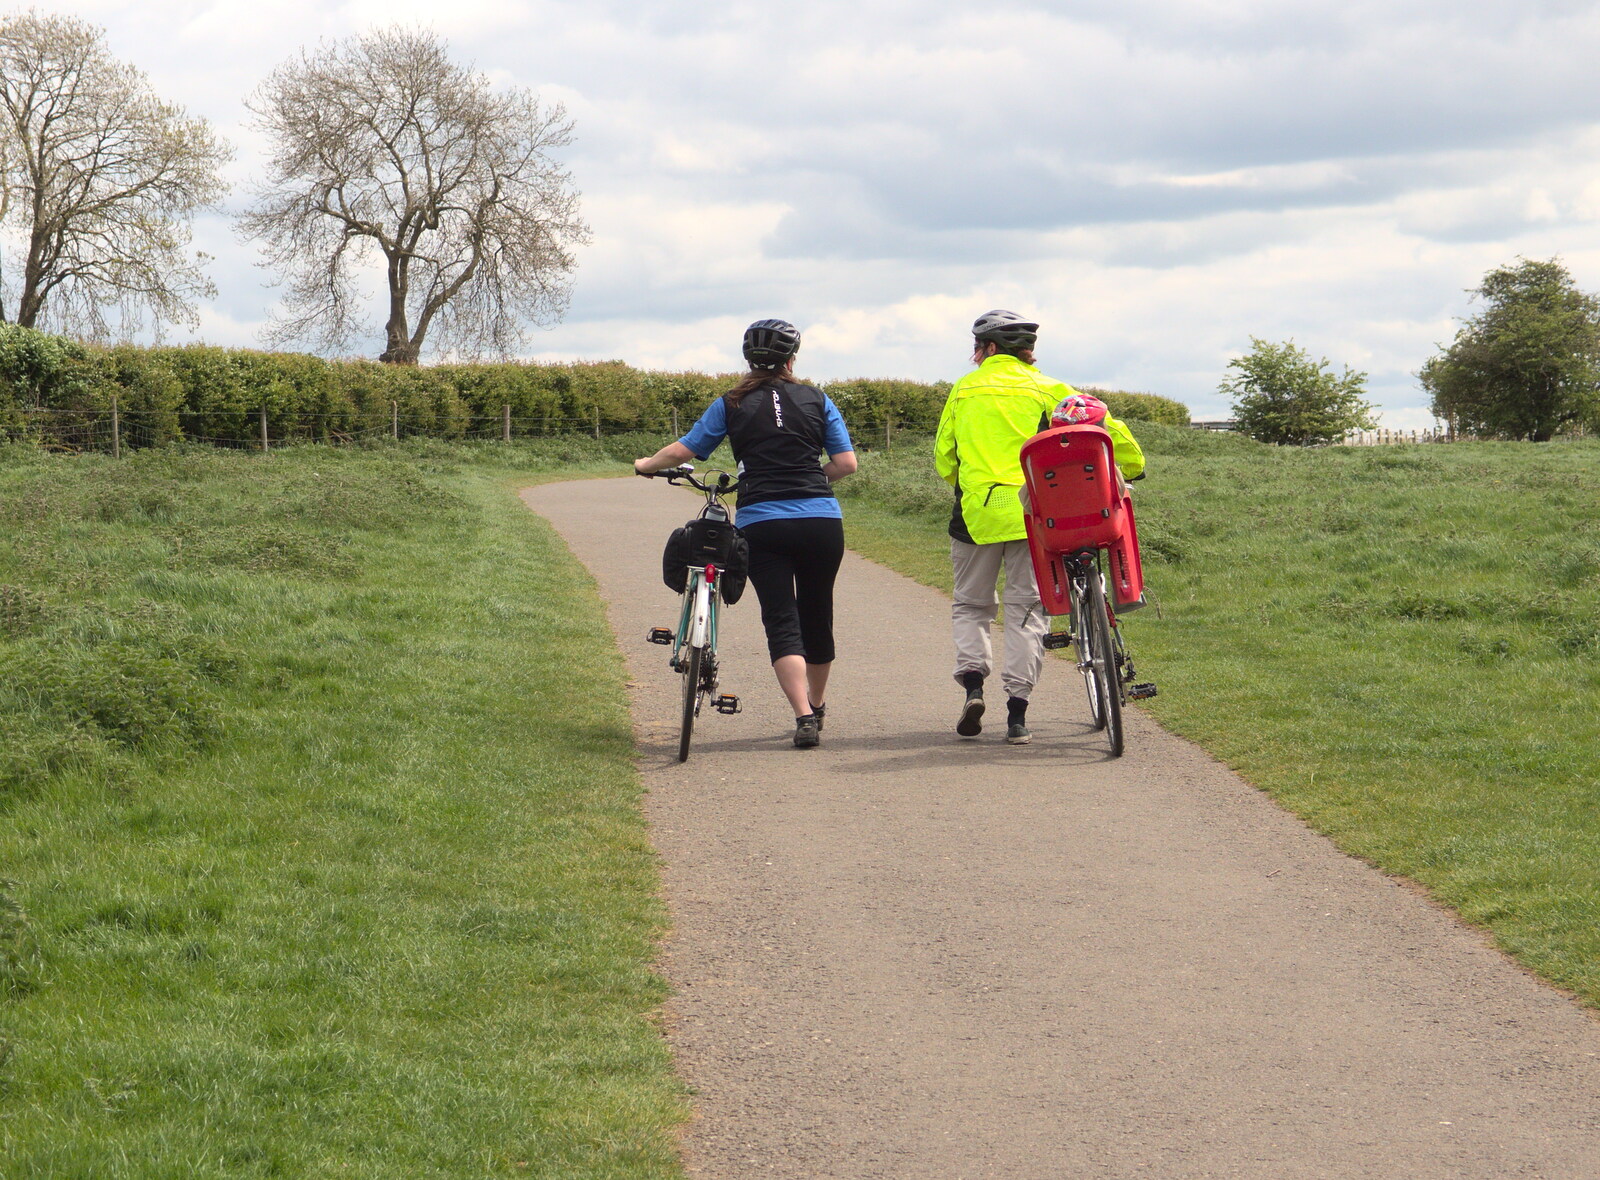 Suey and Isobel push their bikes up a hill from The BSCC Weekend Away, Lyddington, Rutland - 9th May 2015